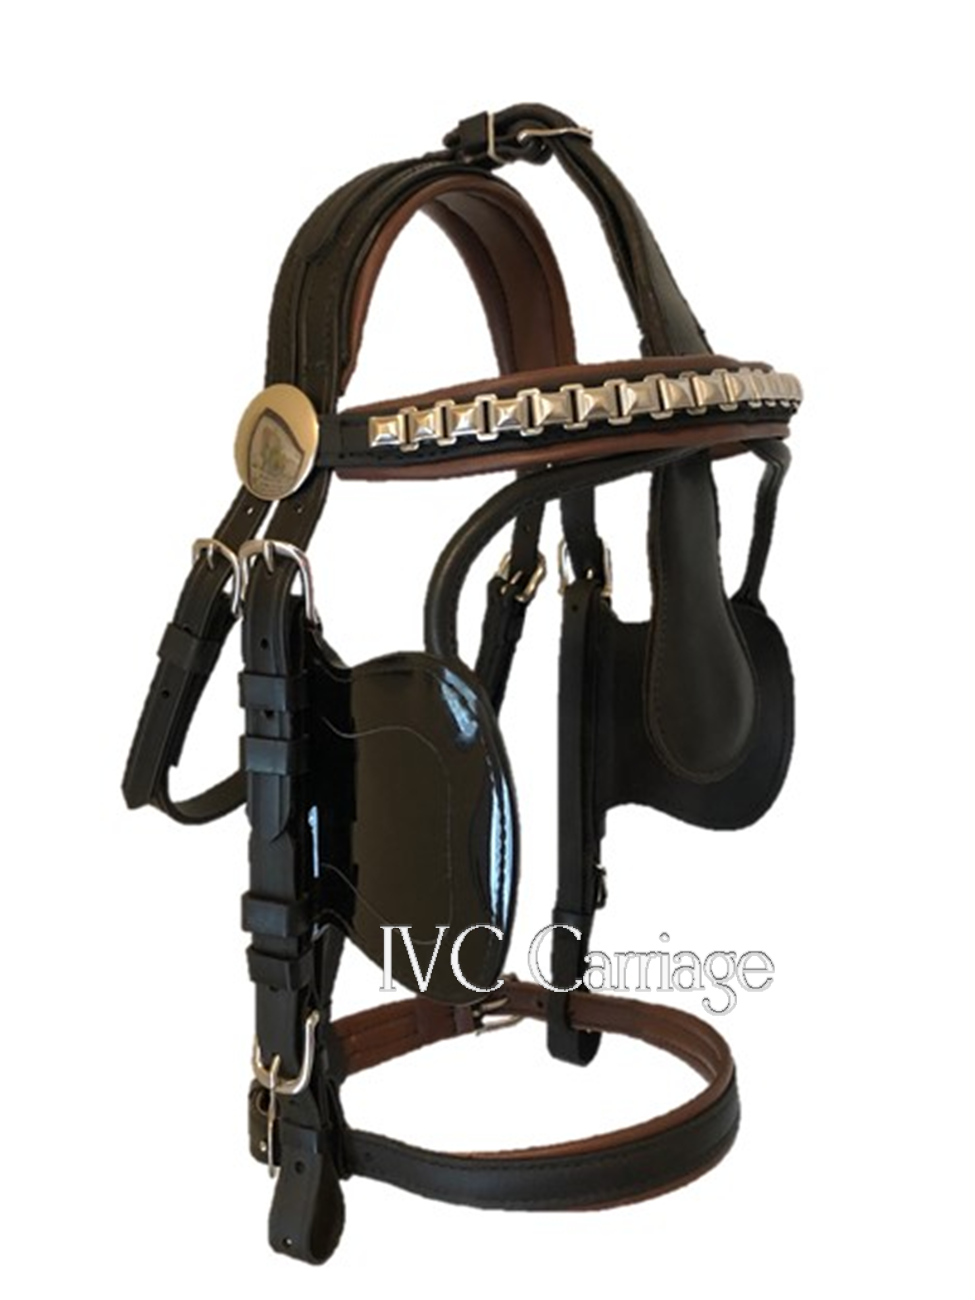 Endura Synthetic Horse Harness Bridle | IVC Carriage